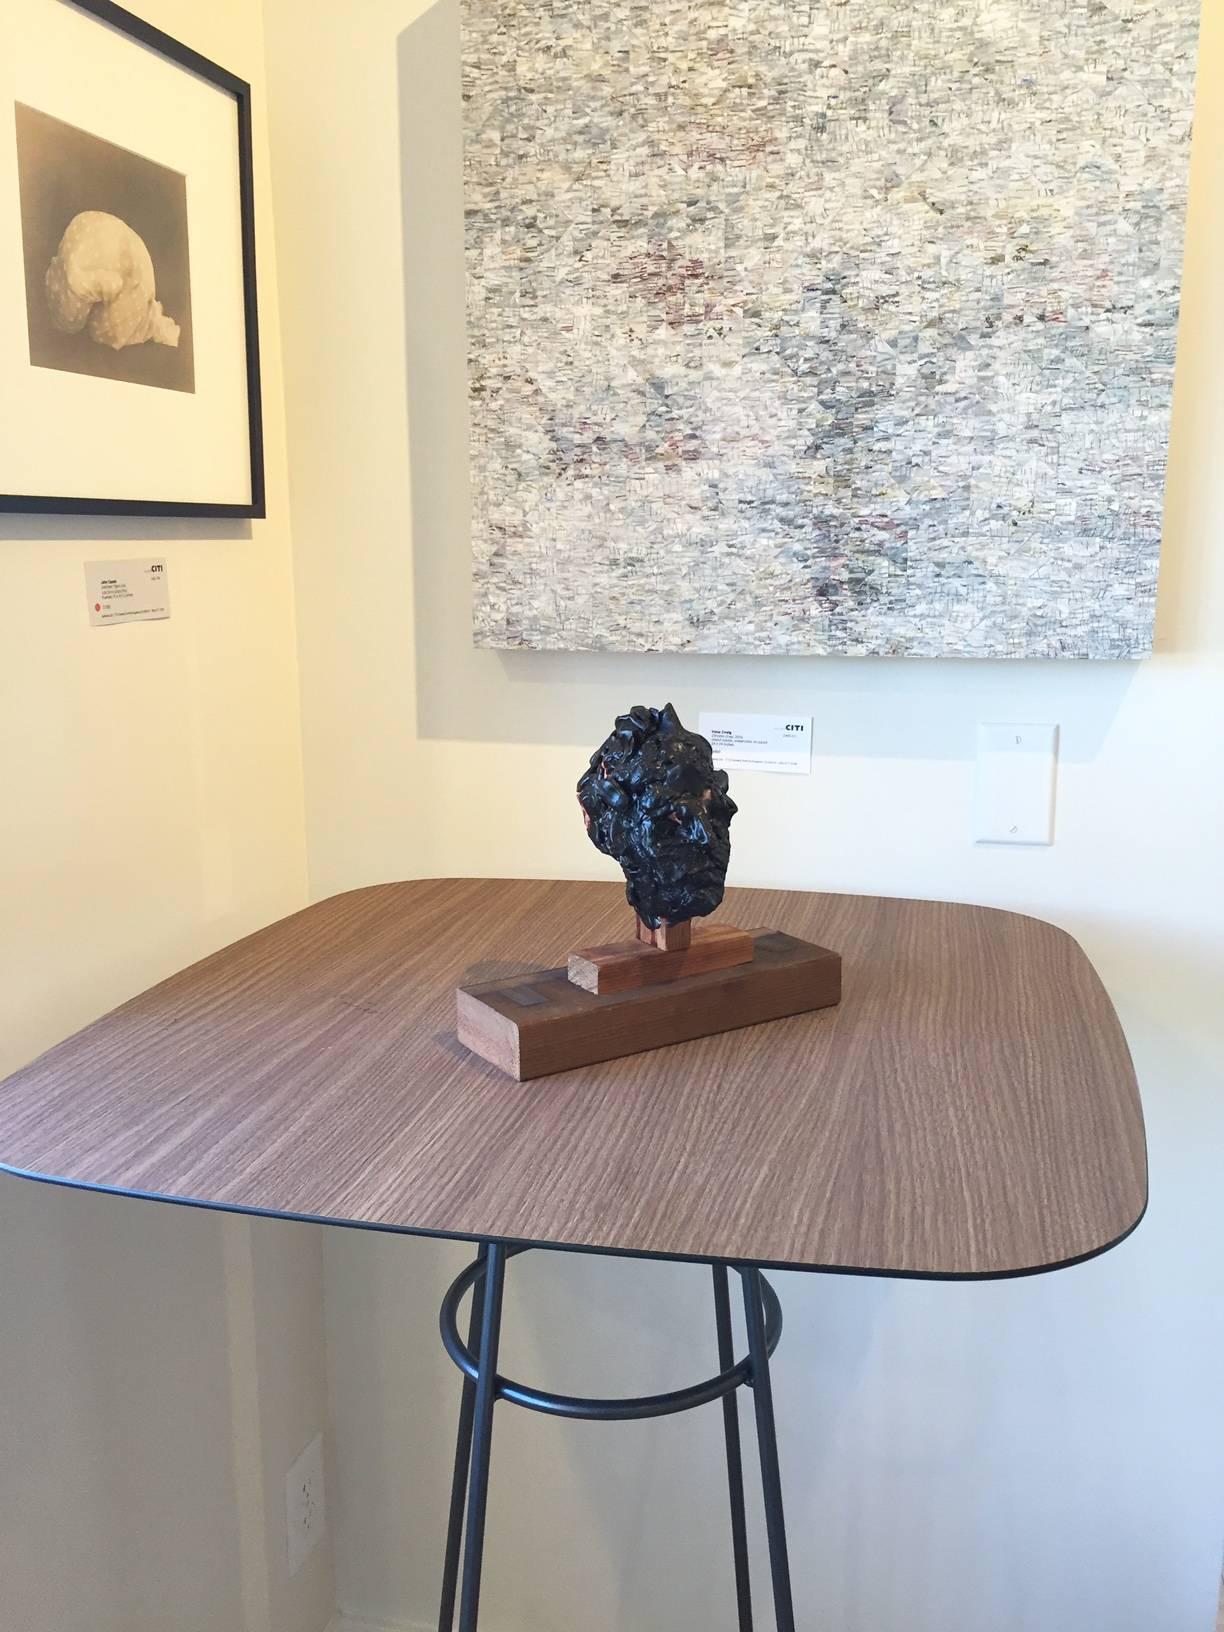 Contemporary bust from John Goodman, whose sculptures, drawings and paintings are a dichotomy of understated minimalism conveying a subtle, but evident smoldering energy. In 'Head No. 1 2014' the artist uses wax, terra-cotta, wire, and wood, to form